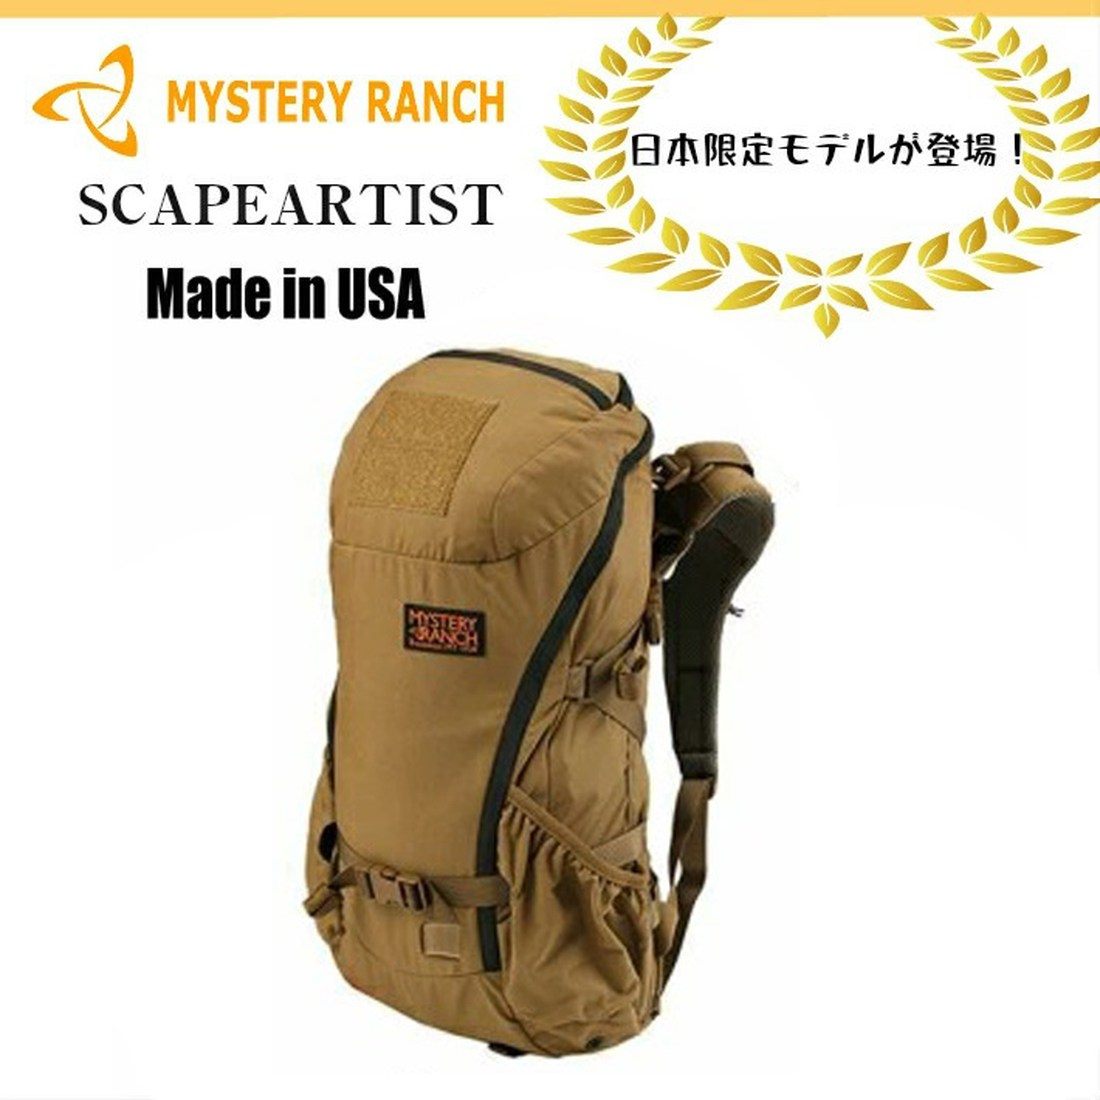 MYSTERY RANCH ミステリーランチ スケープアーティスト40周年記念モデルSCAPEA